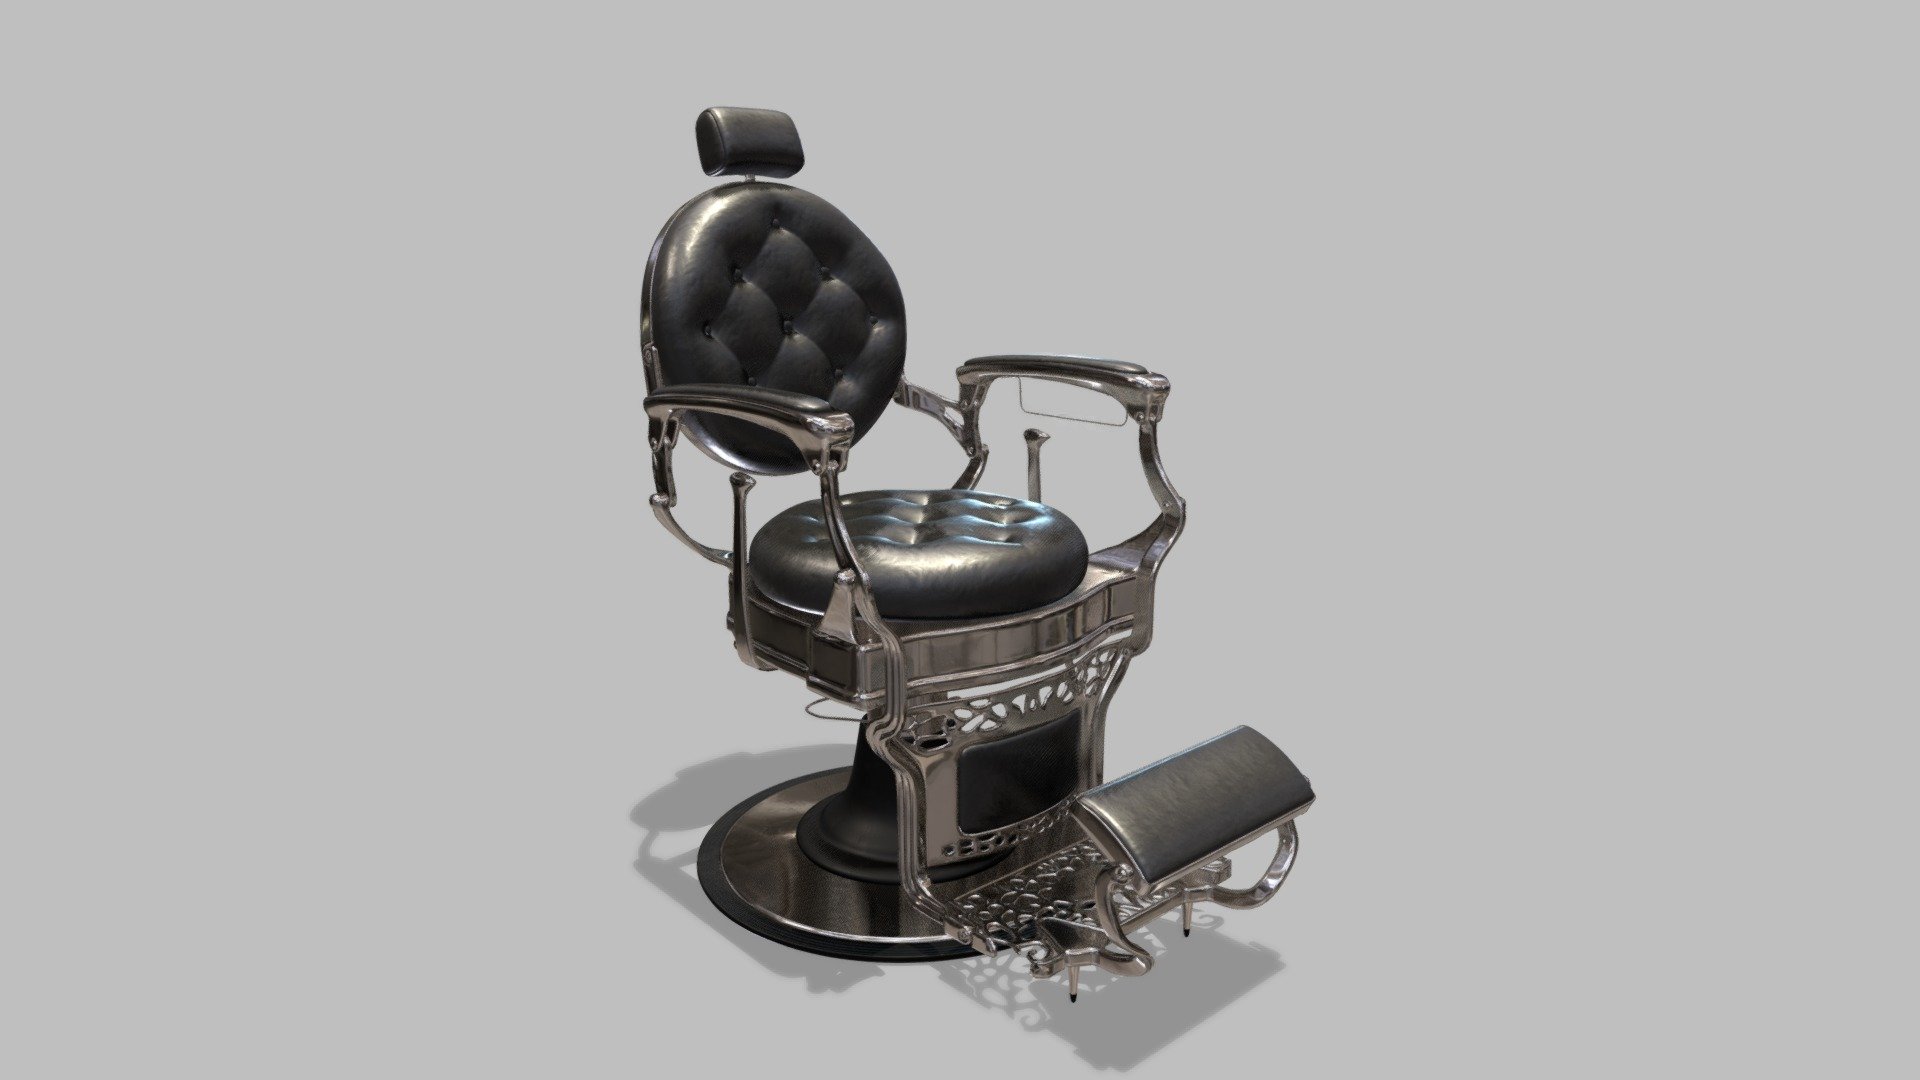 This upscale barber chair features solid steel construction throughout, with a sleek high-polished finish. The Capone's durable rounded seat &amp; back cushions are adorned an exquisite black vinyl covering, as are the chair's padded armrests and classic flip-style footrest 3d model